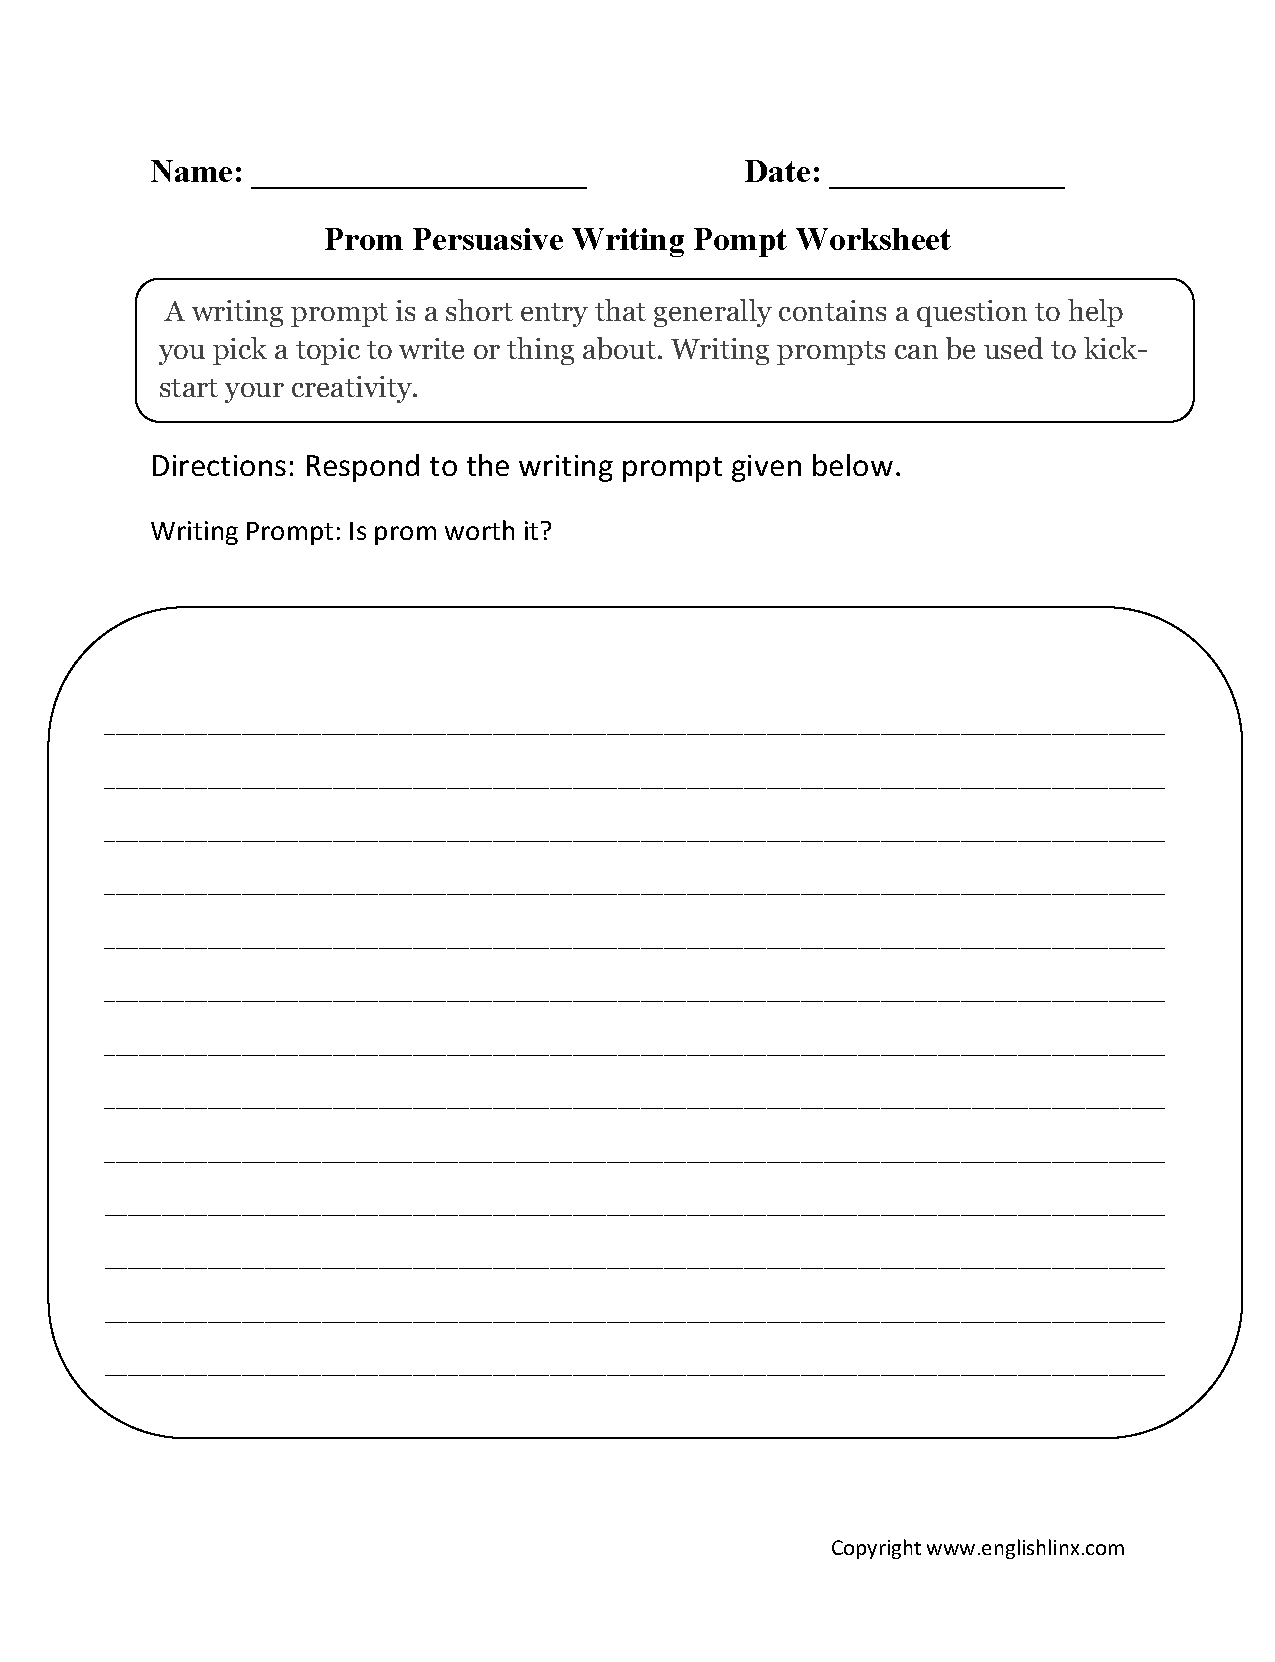 writing-prompts-worksheets-persuasive-writing-prompts-worksheets